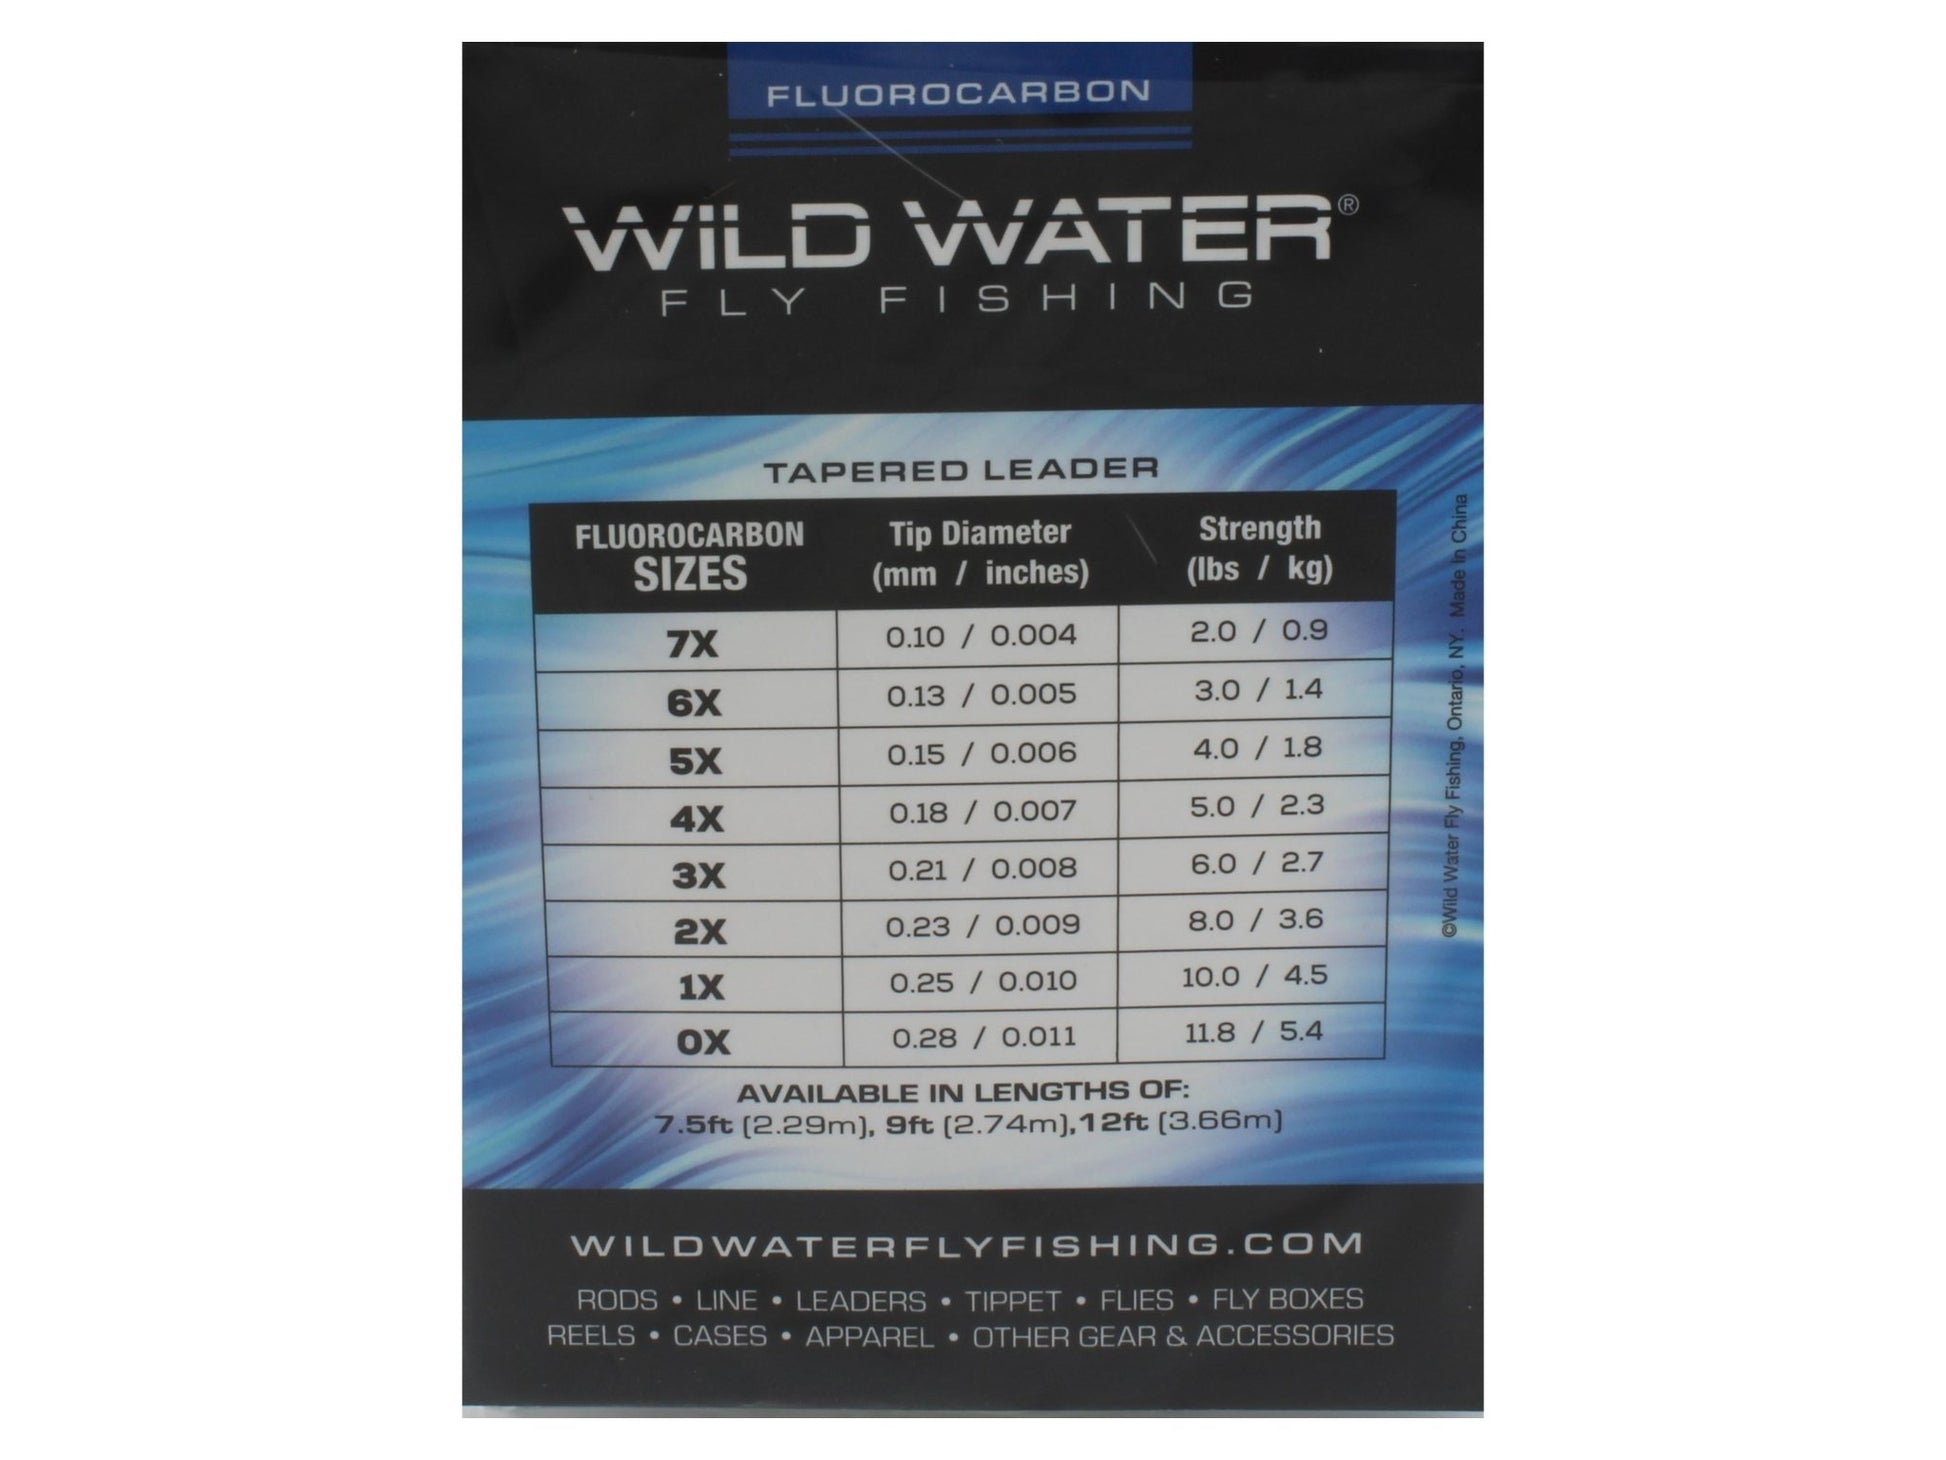 Wild Water Fly Fishing Fluorocarbon Leader 1X, 9', 3 Pack - Angler's Pro Tackle & Outdoors